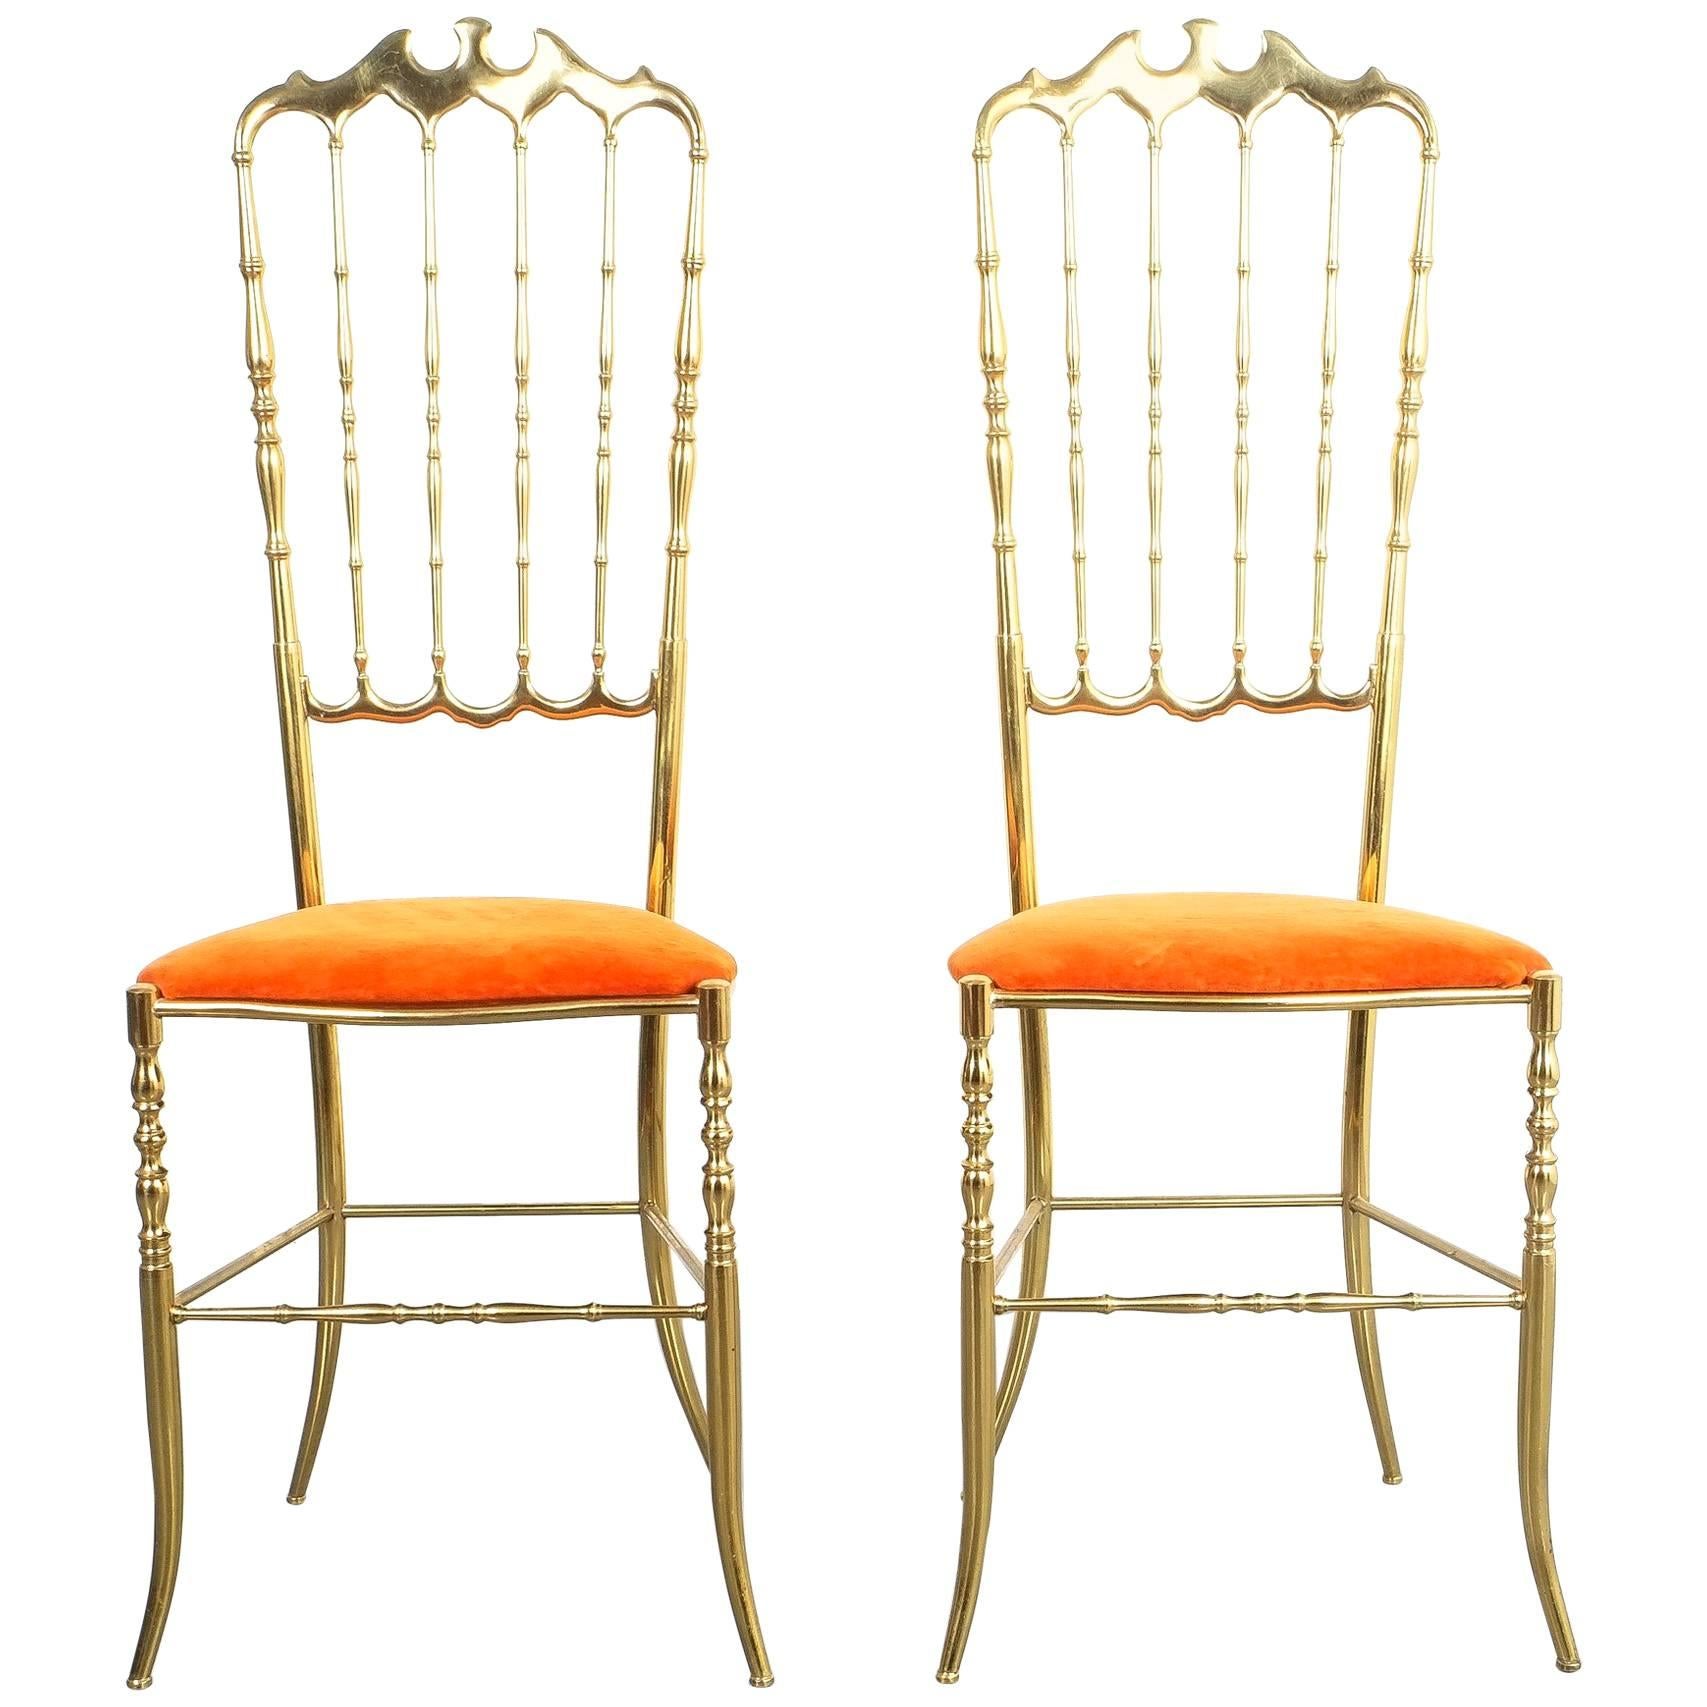 Pair of Polished High Back Brass Chairs by Chiavari, Italy, 1950